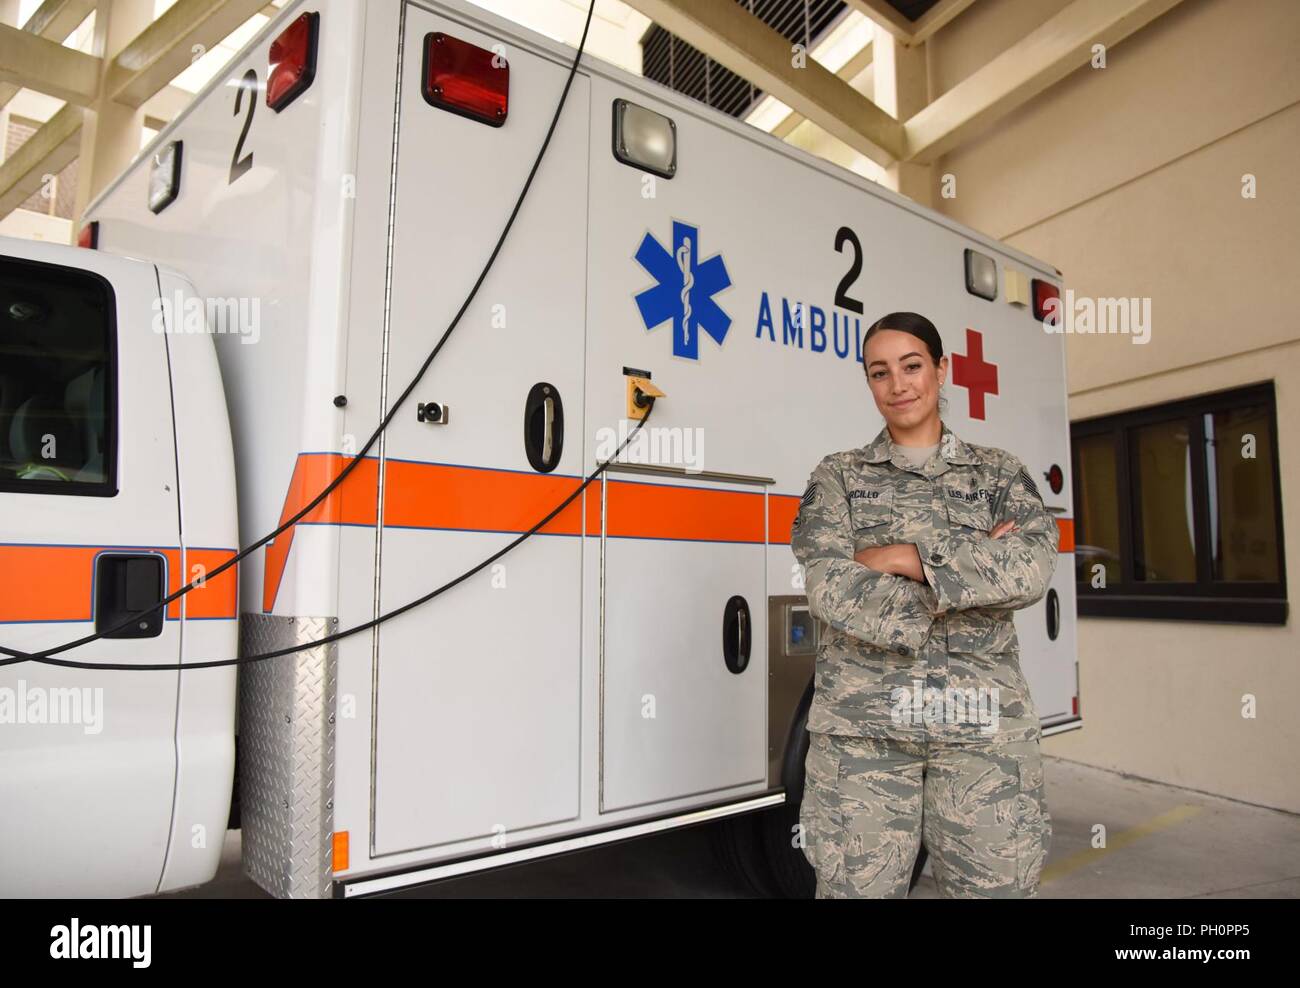 U.S. Air Force Tech. Sgt. Juliet Corcillo, 81st Medical Operations Squadron emergency room NCO in charge, poses for a photo in front of an ambulance outside of the Keesler Medical Center emergency room at Keesler Air Force Base, Mississippi, June 14, 2018. Corcillo was awarded a full ride scholarship to medical school from the Air Force’s Health Professions Scholarship Program. Stock Photo